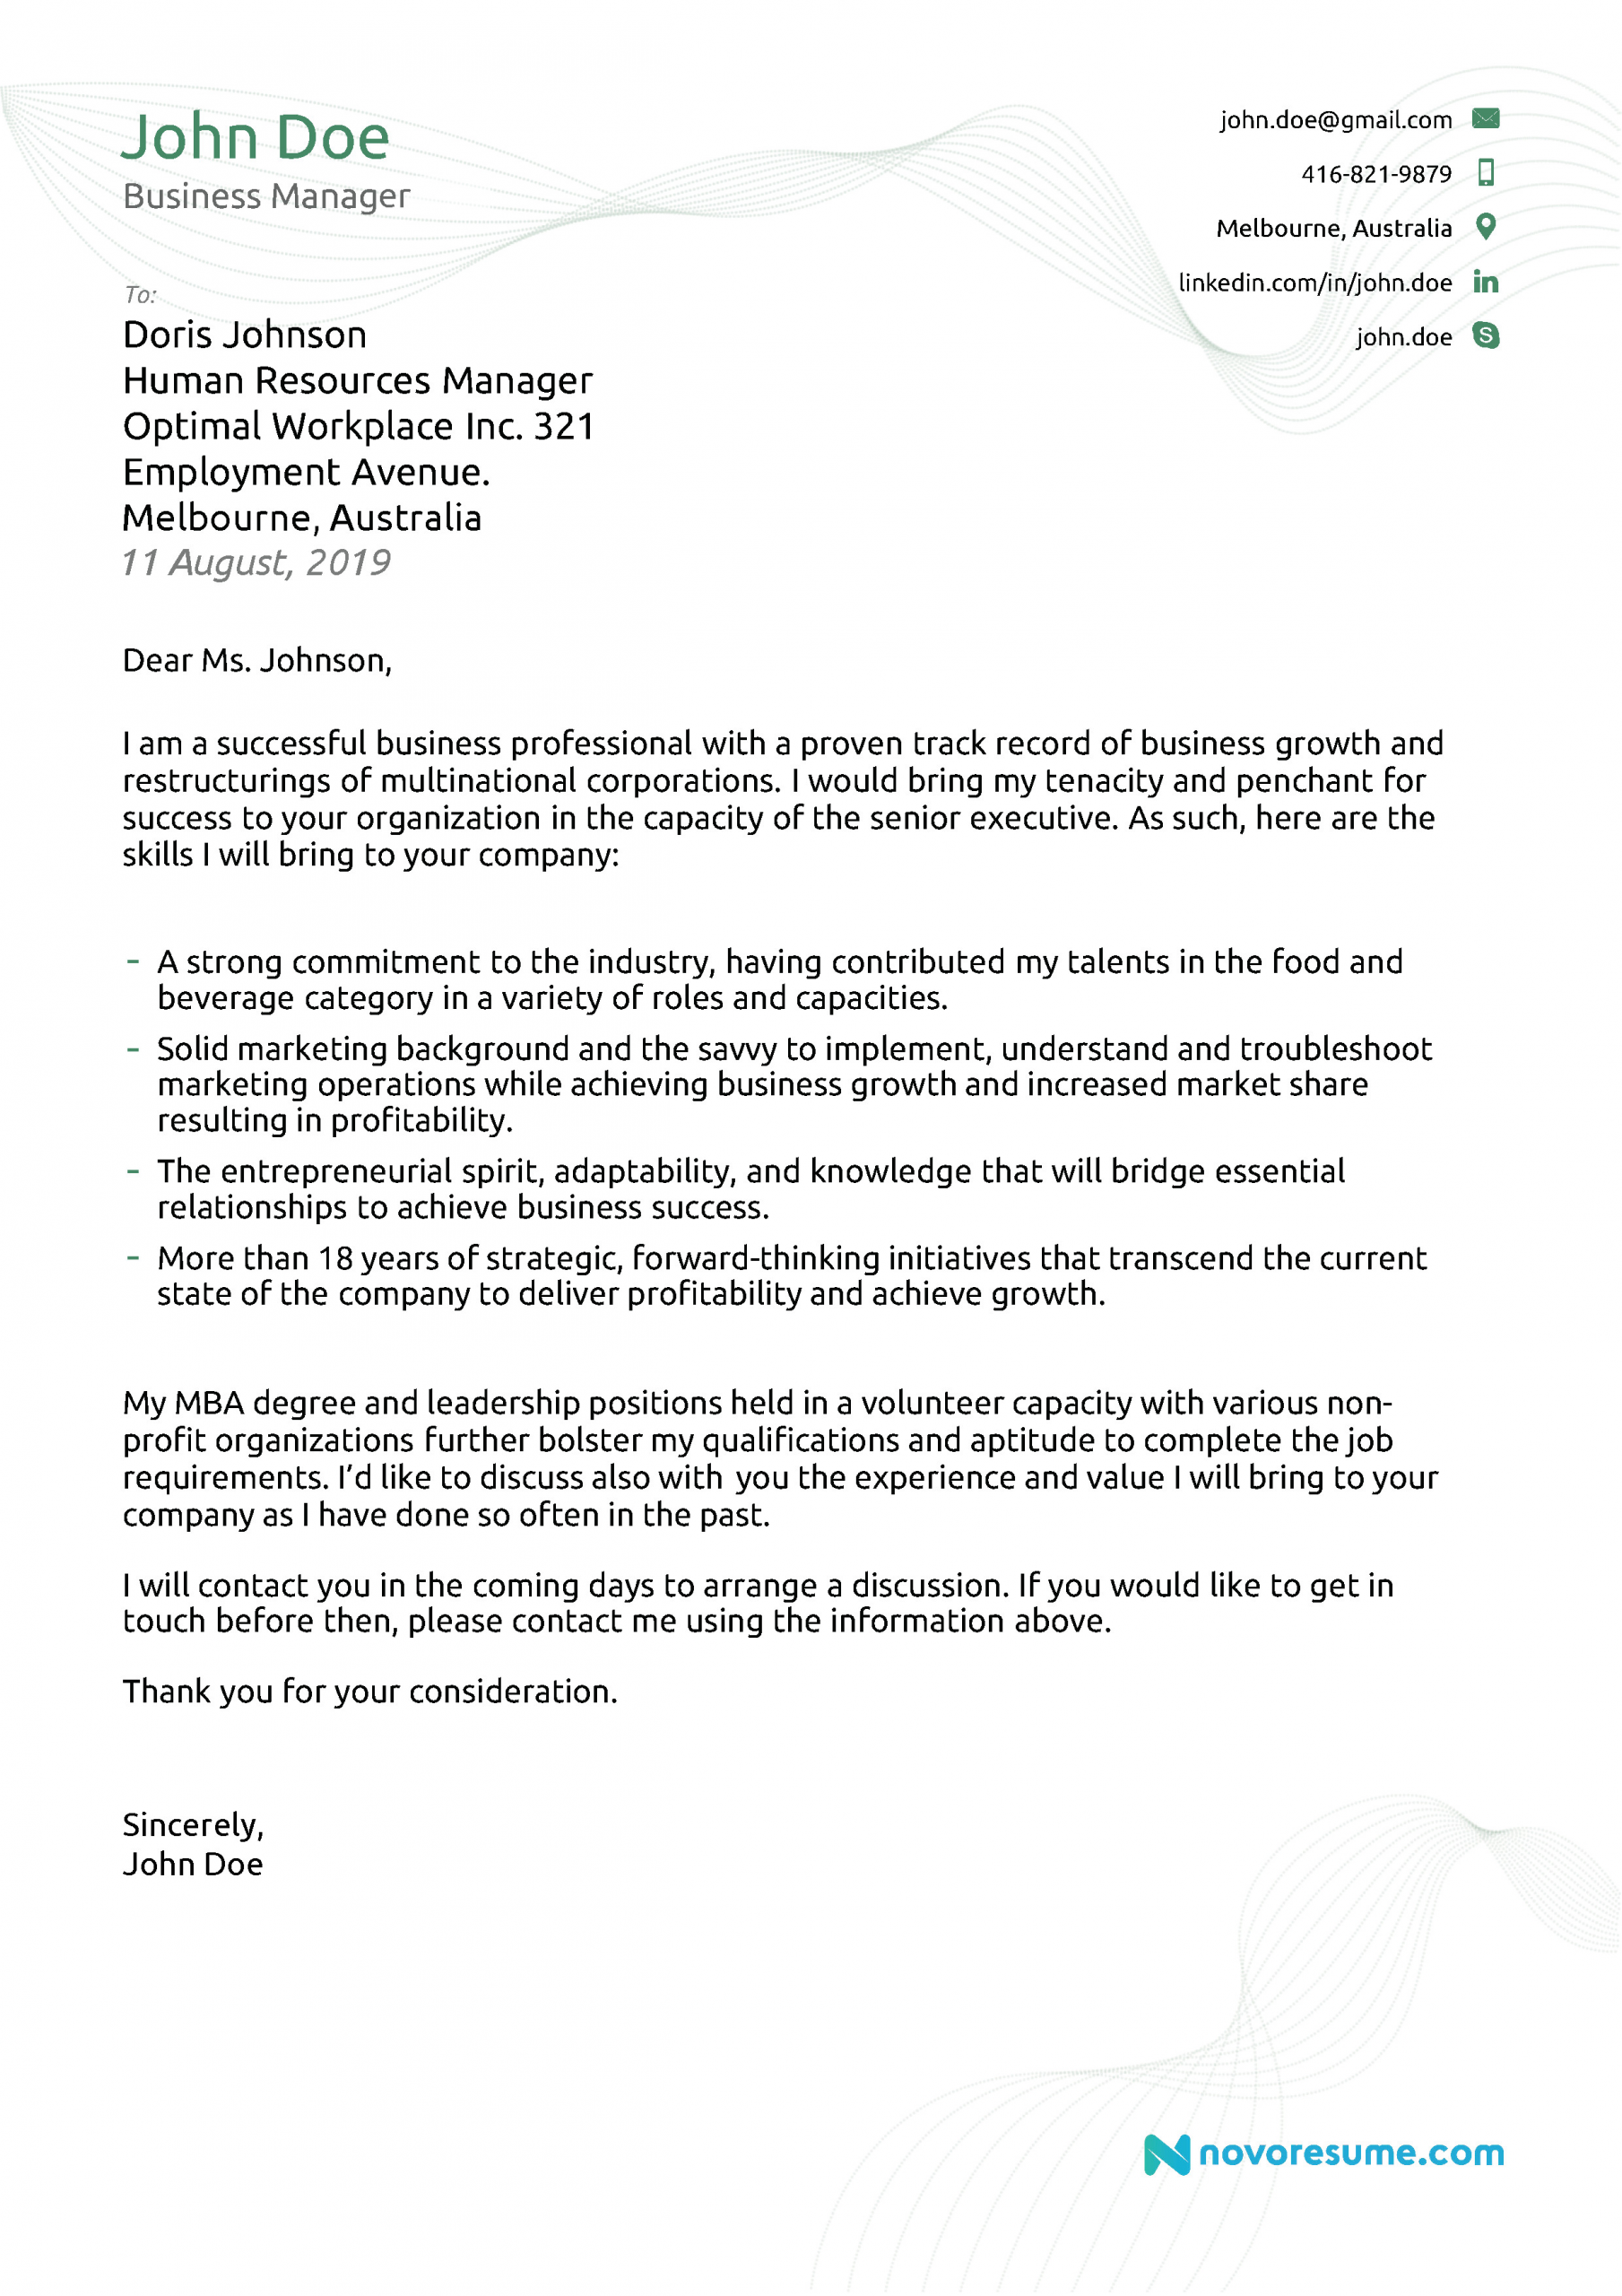 Sample Cover Letter Template Cover Letter Examples